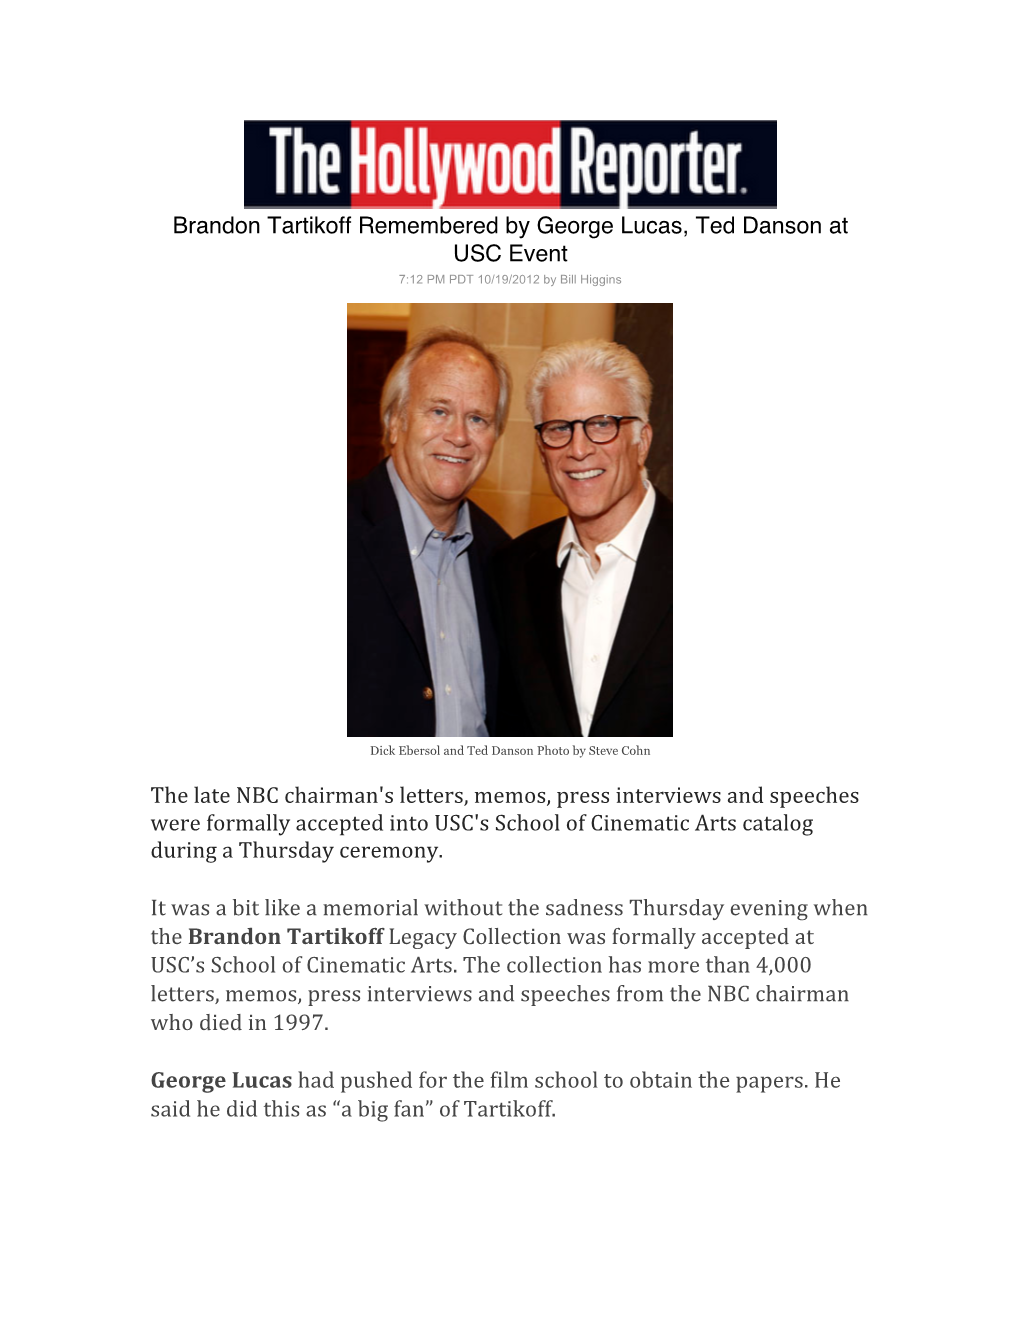 Brandon Tartikoff Remembered by George Lucas, Ted Danson at USC Event 7:12 PM PDT 10/19/2012 by Bill Higgins